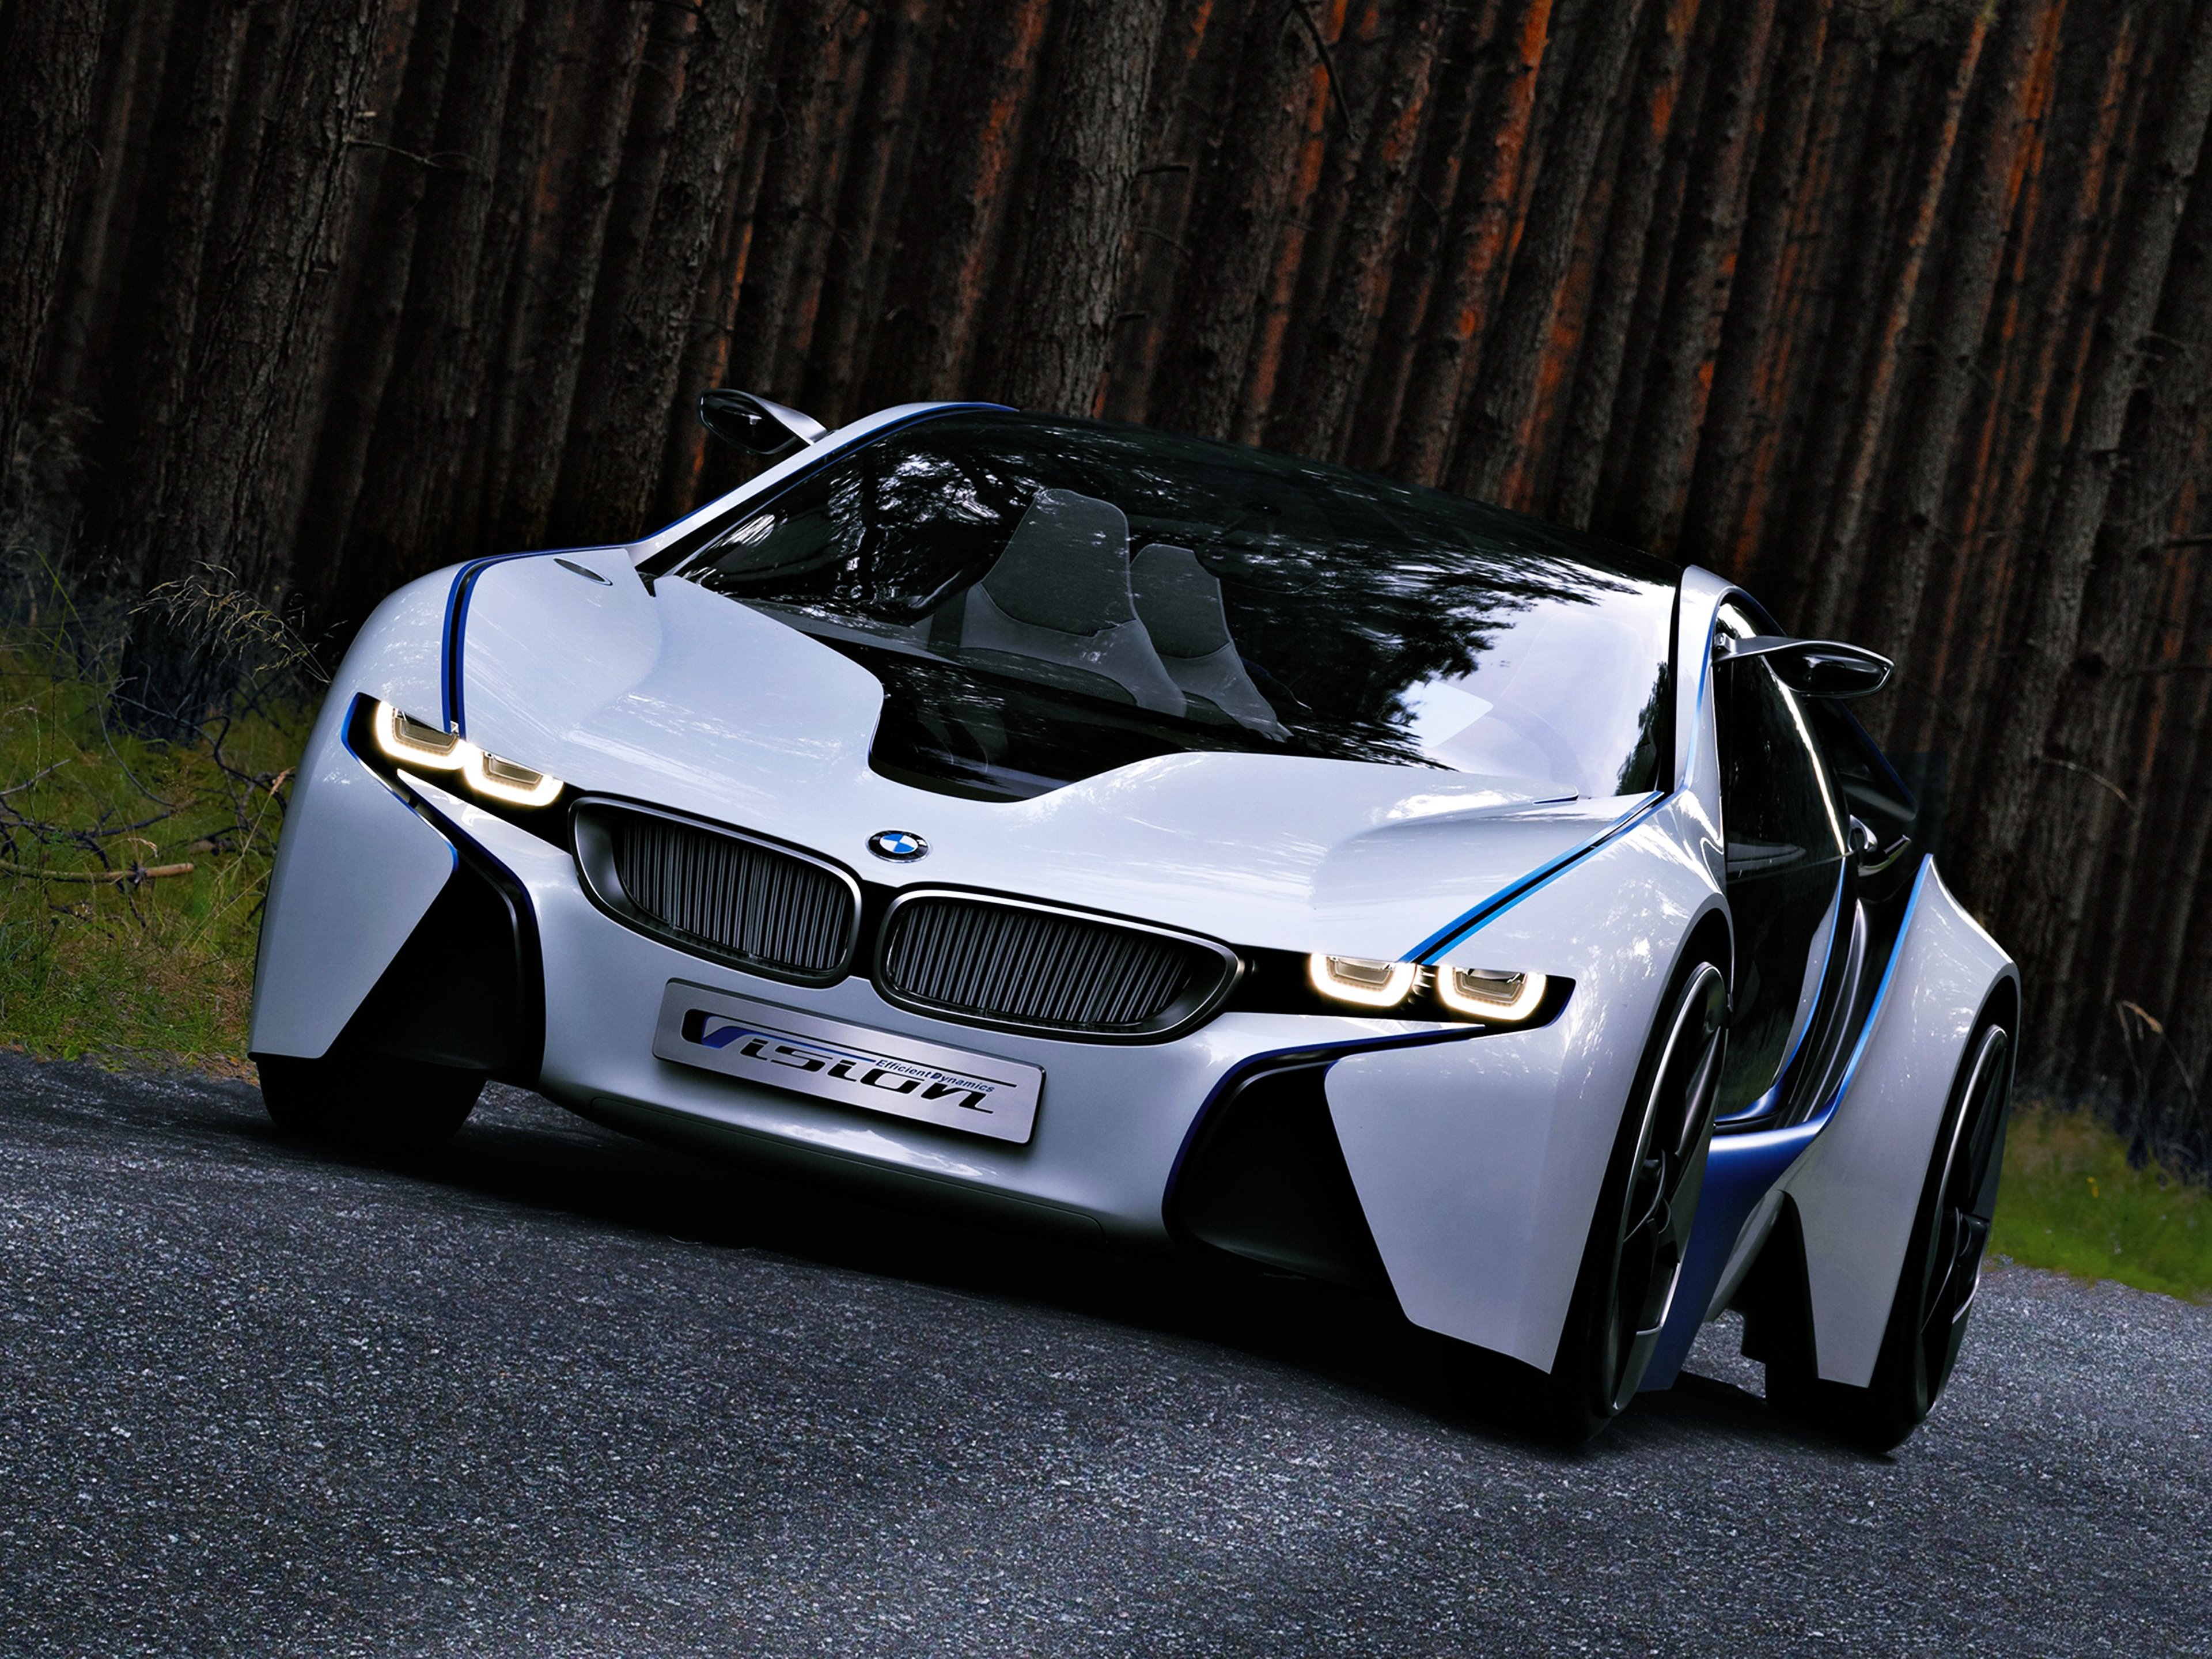 bmw, Vision, Efficient, Dynamics, Concept, Concept, Powerful, Beautiful, Limber, Cars, Supercars, Jungle, Trees, Road, German Wallpaper